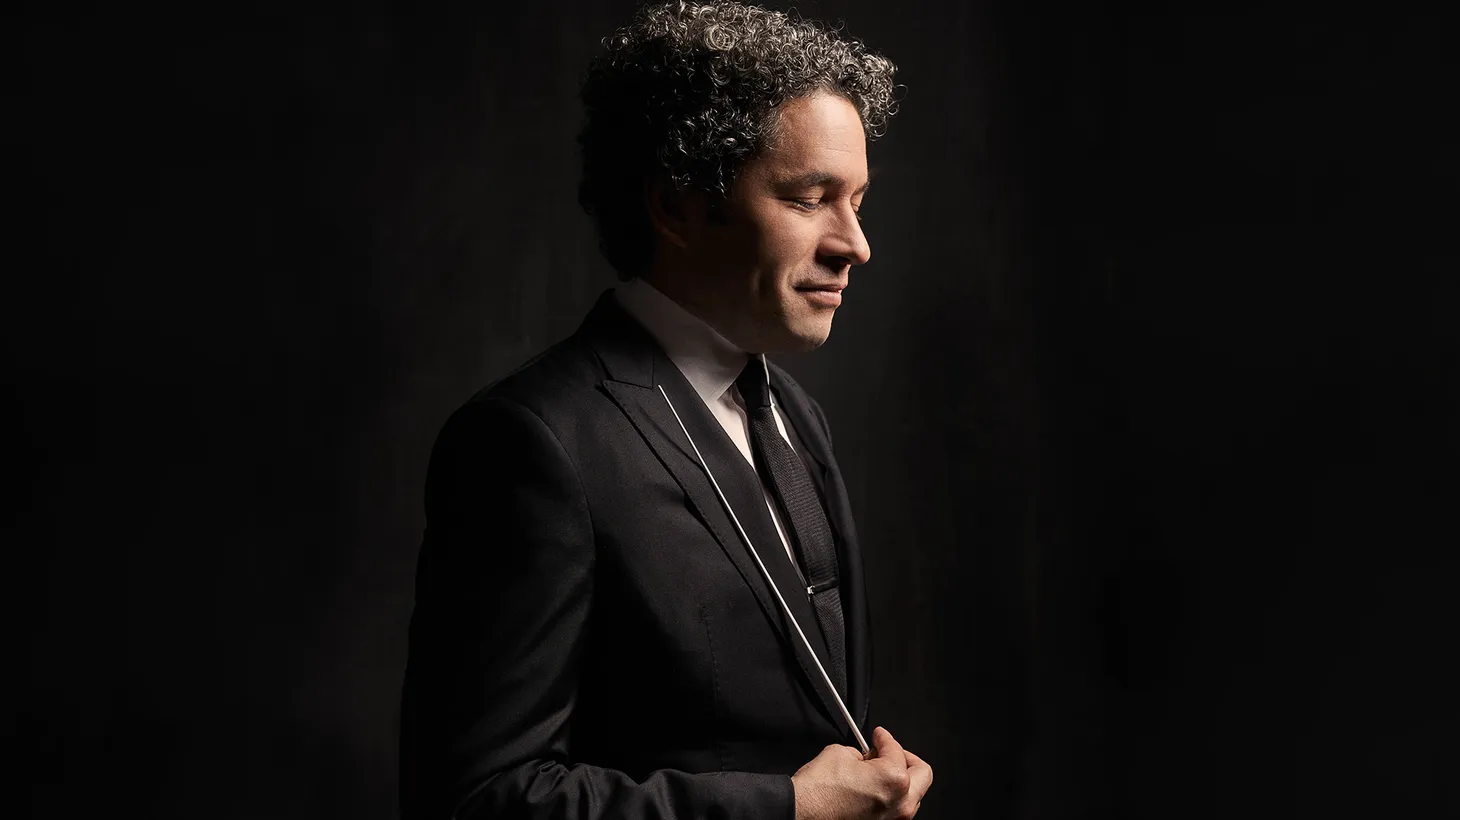 Gustavo Dudamel says of the LA Philharmonic: “It is my orchestra. And it will be my orchestra even if there’s another conductor taking over in the next years. It will be always a family. And I think you never leave home. … Maybe physically, you are not as present, but home is home. And I think Los Angeles, for me, is home.”